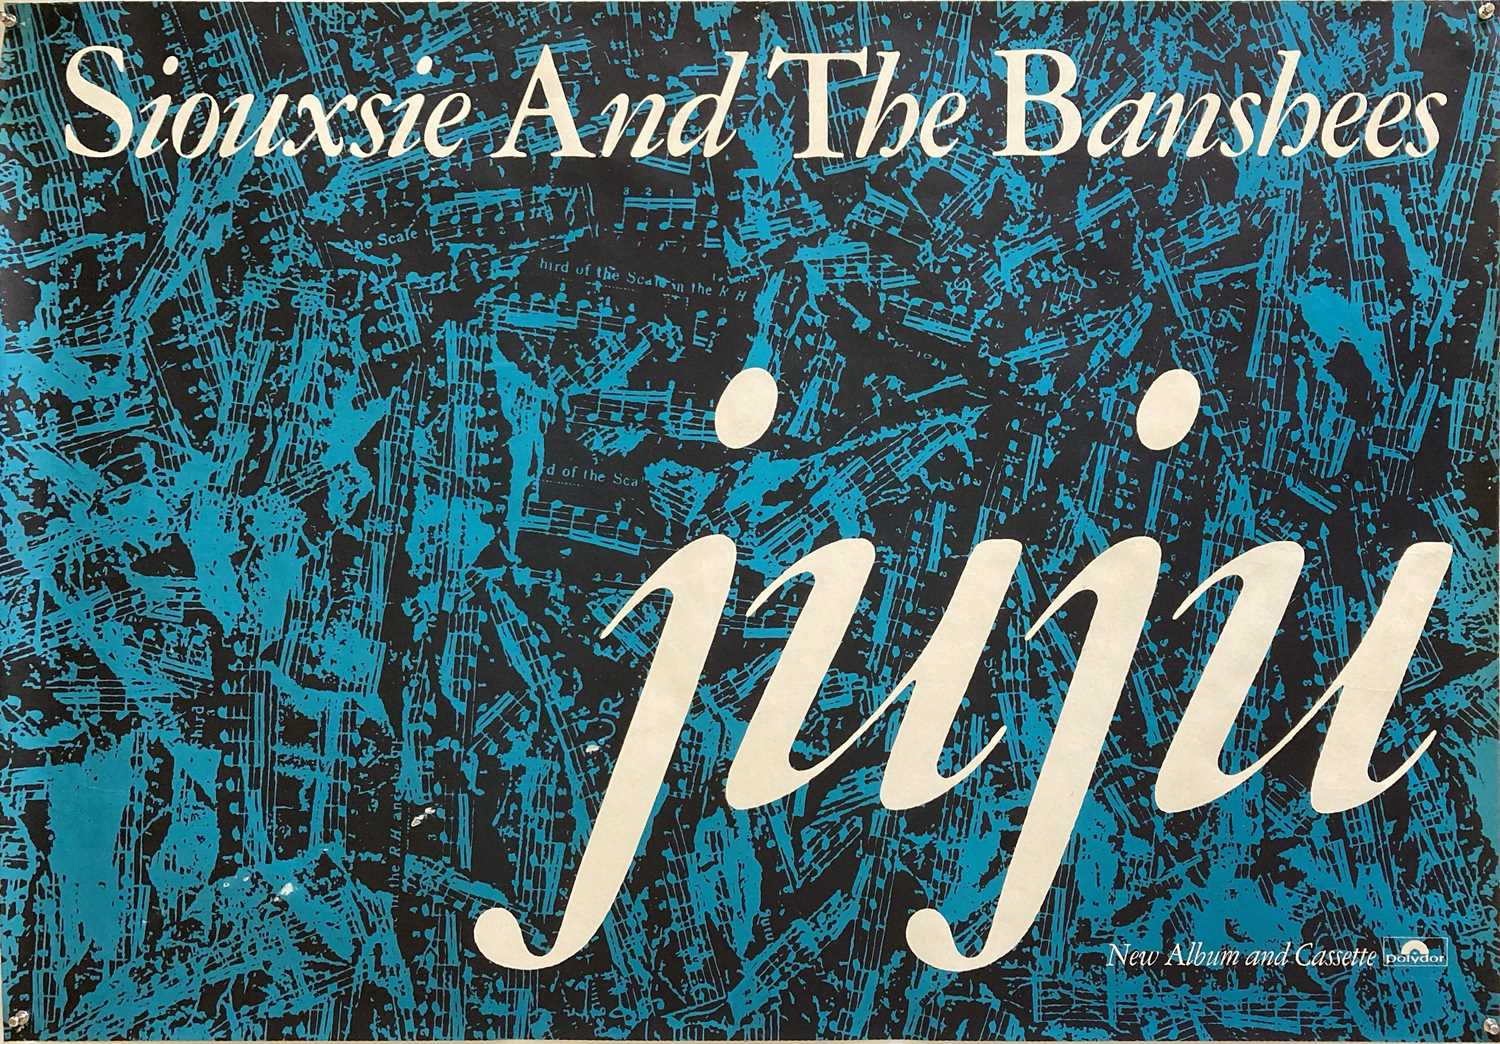 SIOUXSIE AND THE BANSHEES JUJU ALBUM POSTER.